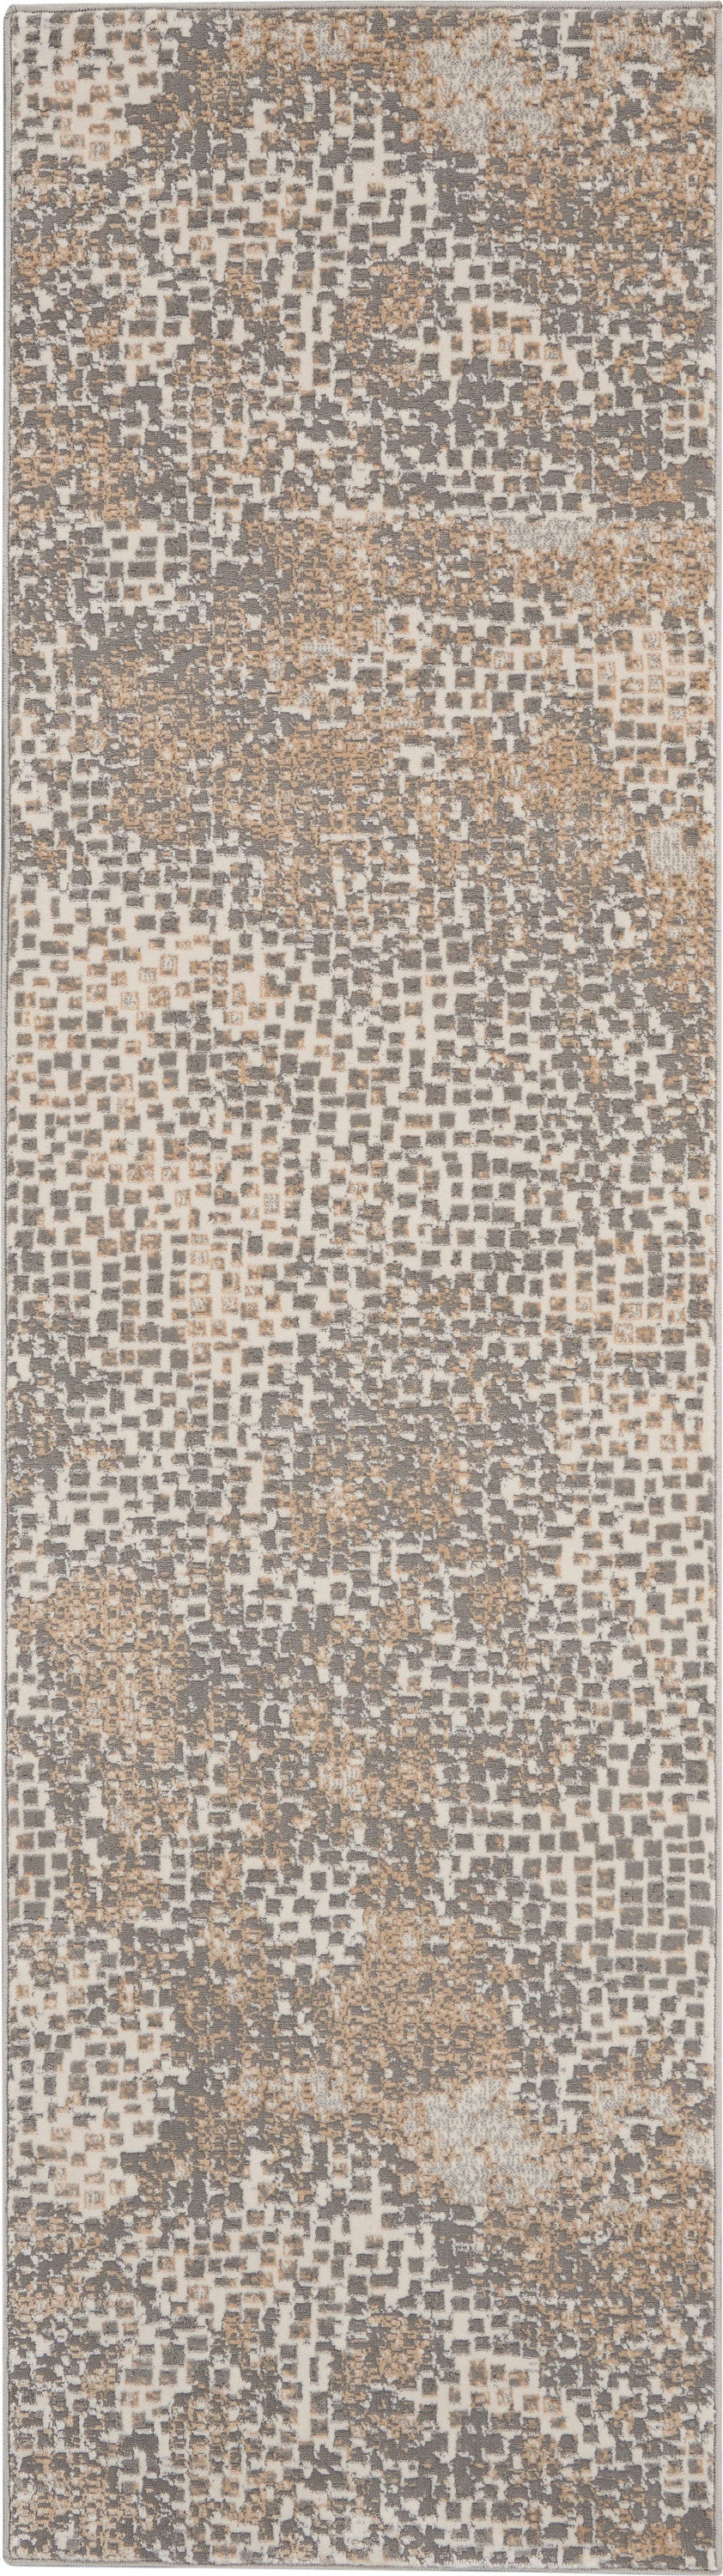 Michael Amini MA90 Uptown UPT02 Beige Grey Contemporary Machinemade Rug